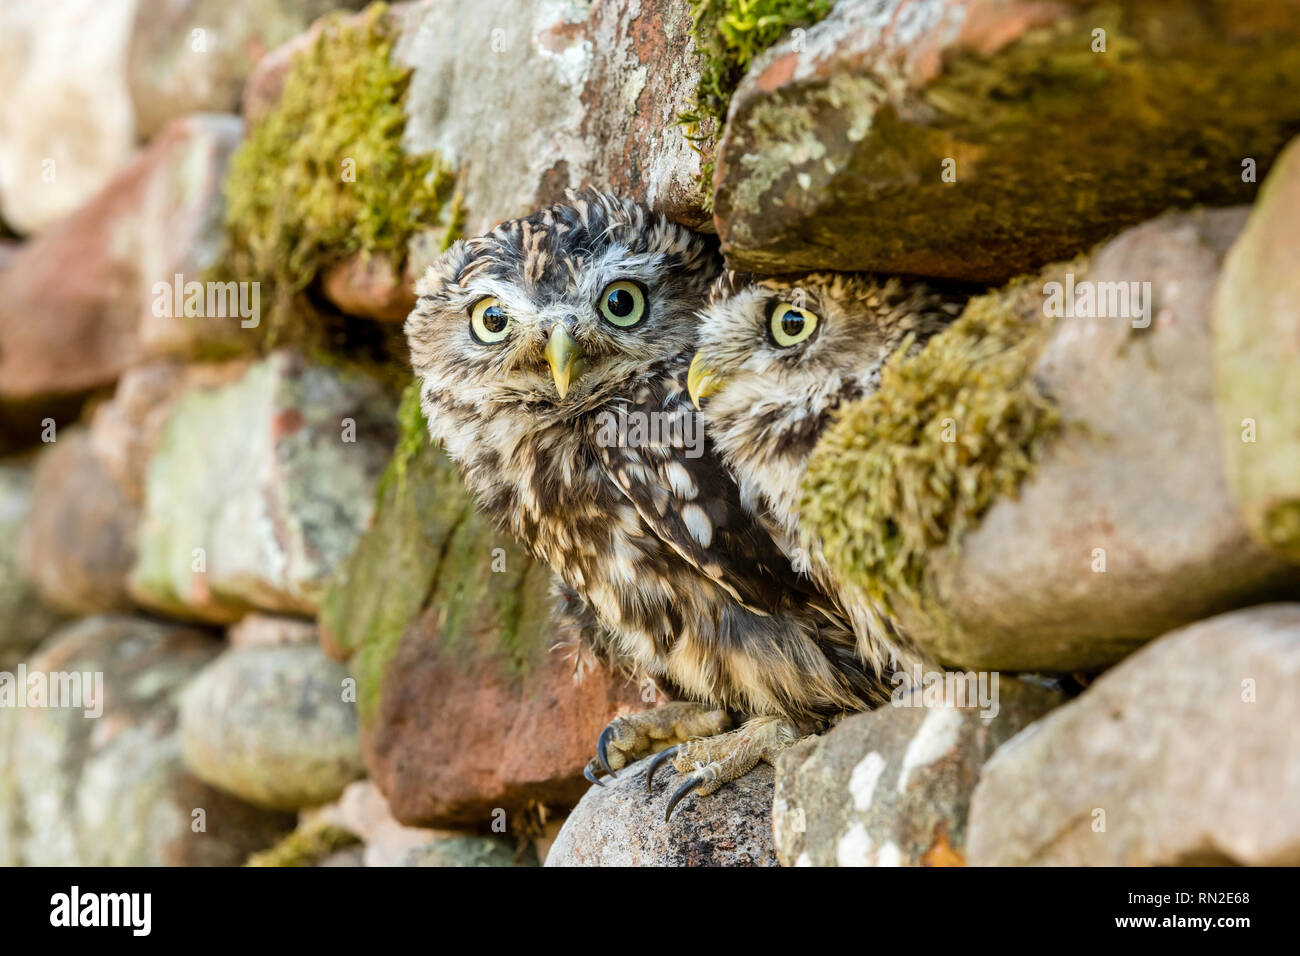 Owls (Athene noctua). Two little owls in natural habitat, perched in dry stone walling and peeping out. Little owls have large yellow eyes.  Landscape Stock Photo